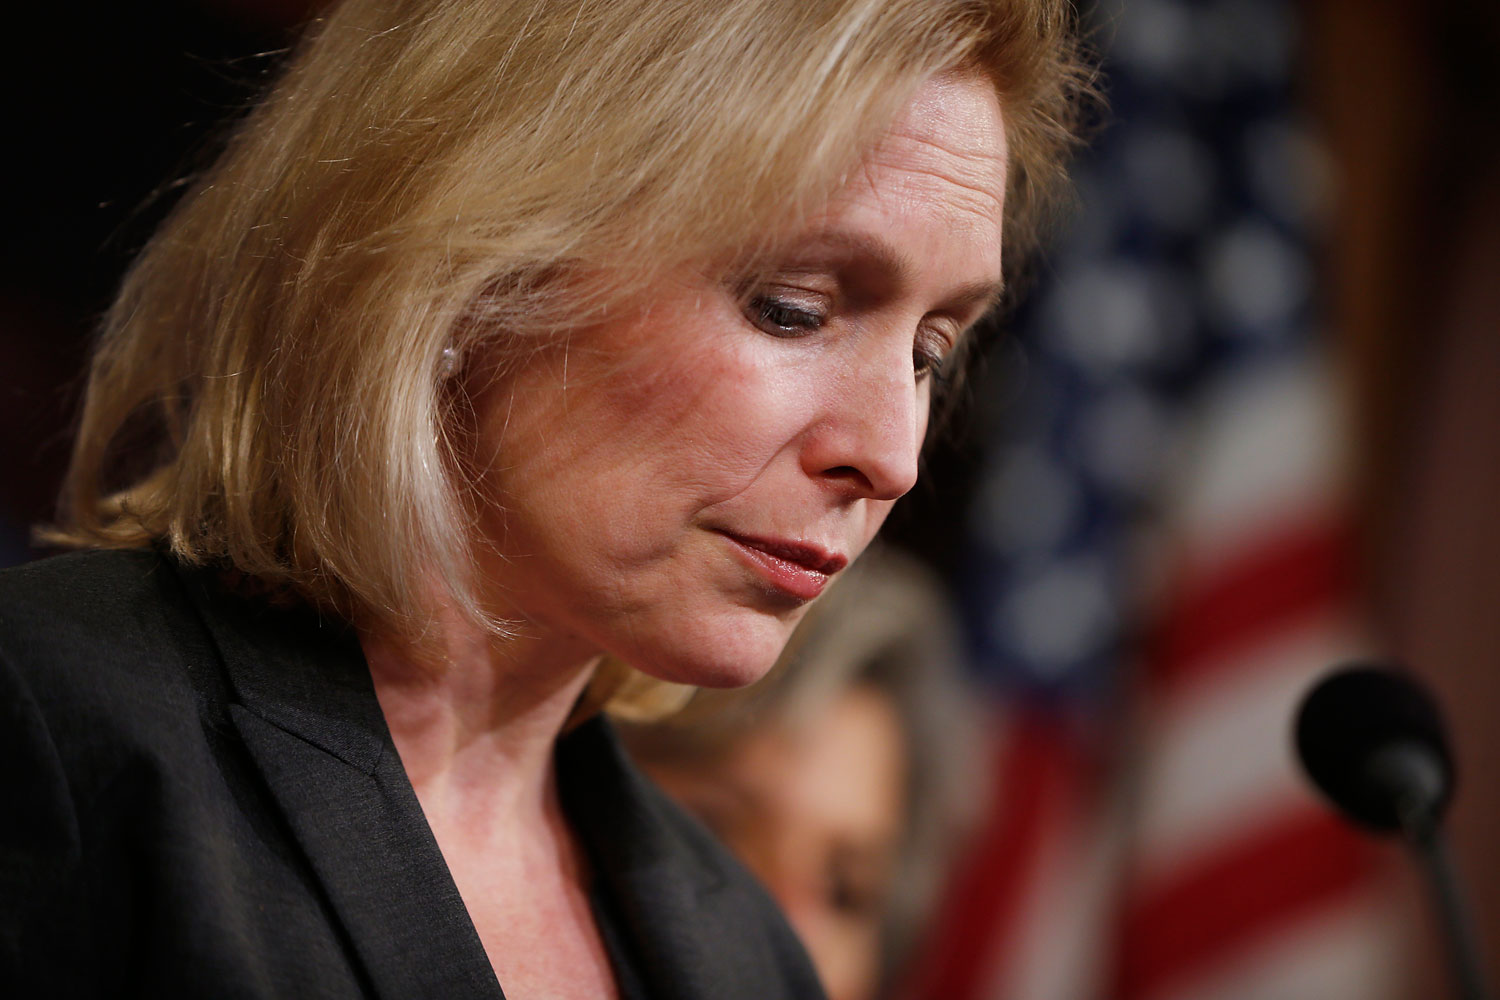 Senator Kirsten Gillibrand, a New York Democrat, pauses while speaking at a news conference on Capitol Hill in Washington on March 6, 2014, following a Senate vote on military sexual assaults (Charles Dharapak&mdash;AP)